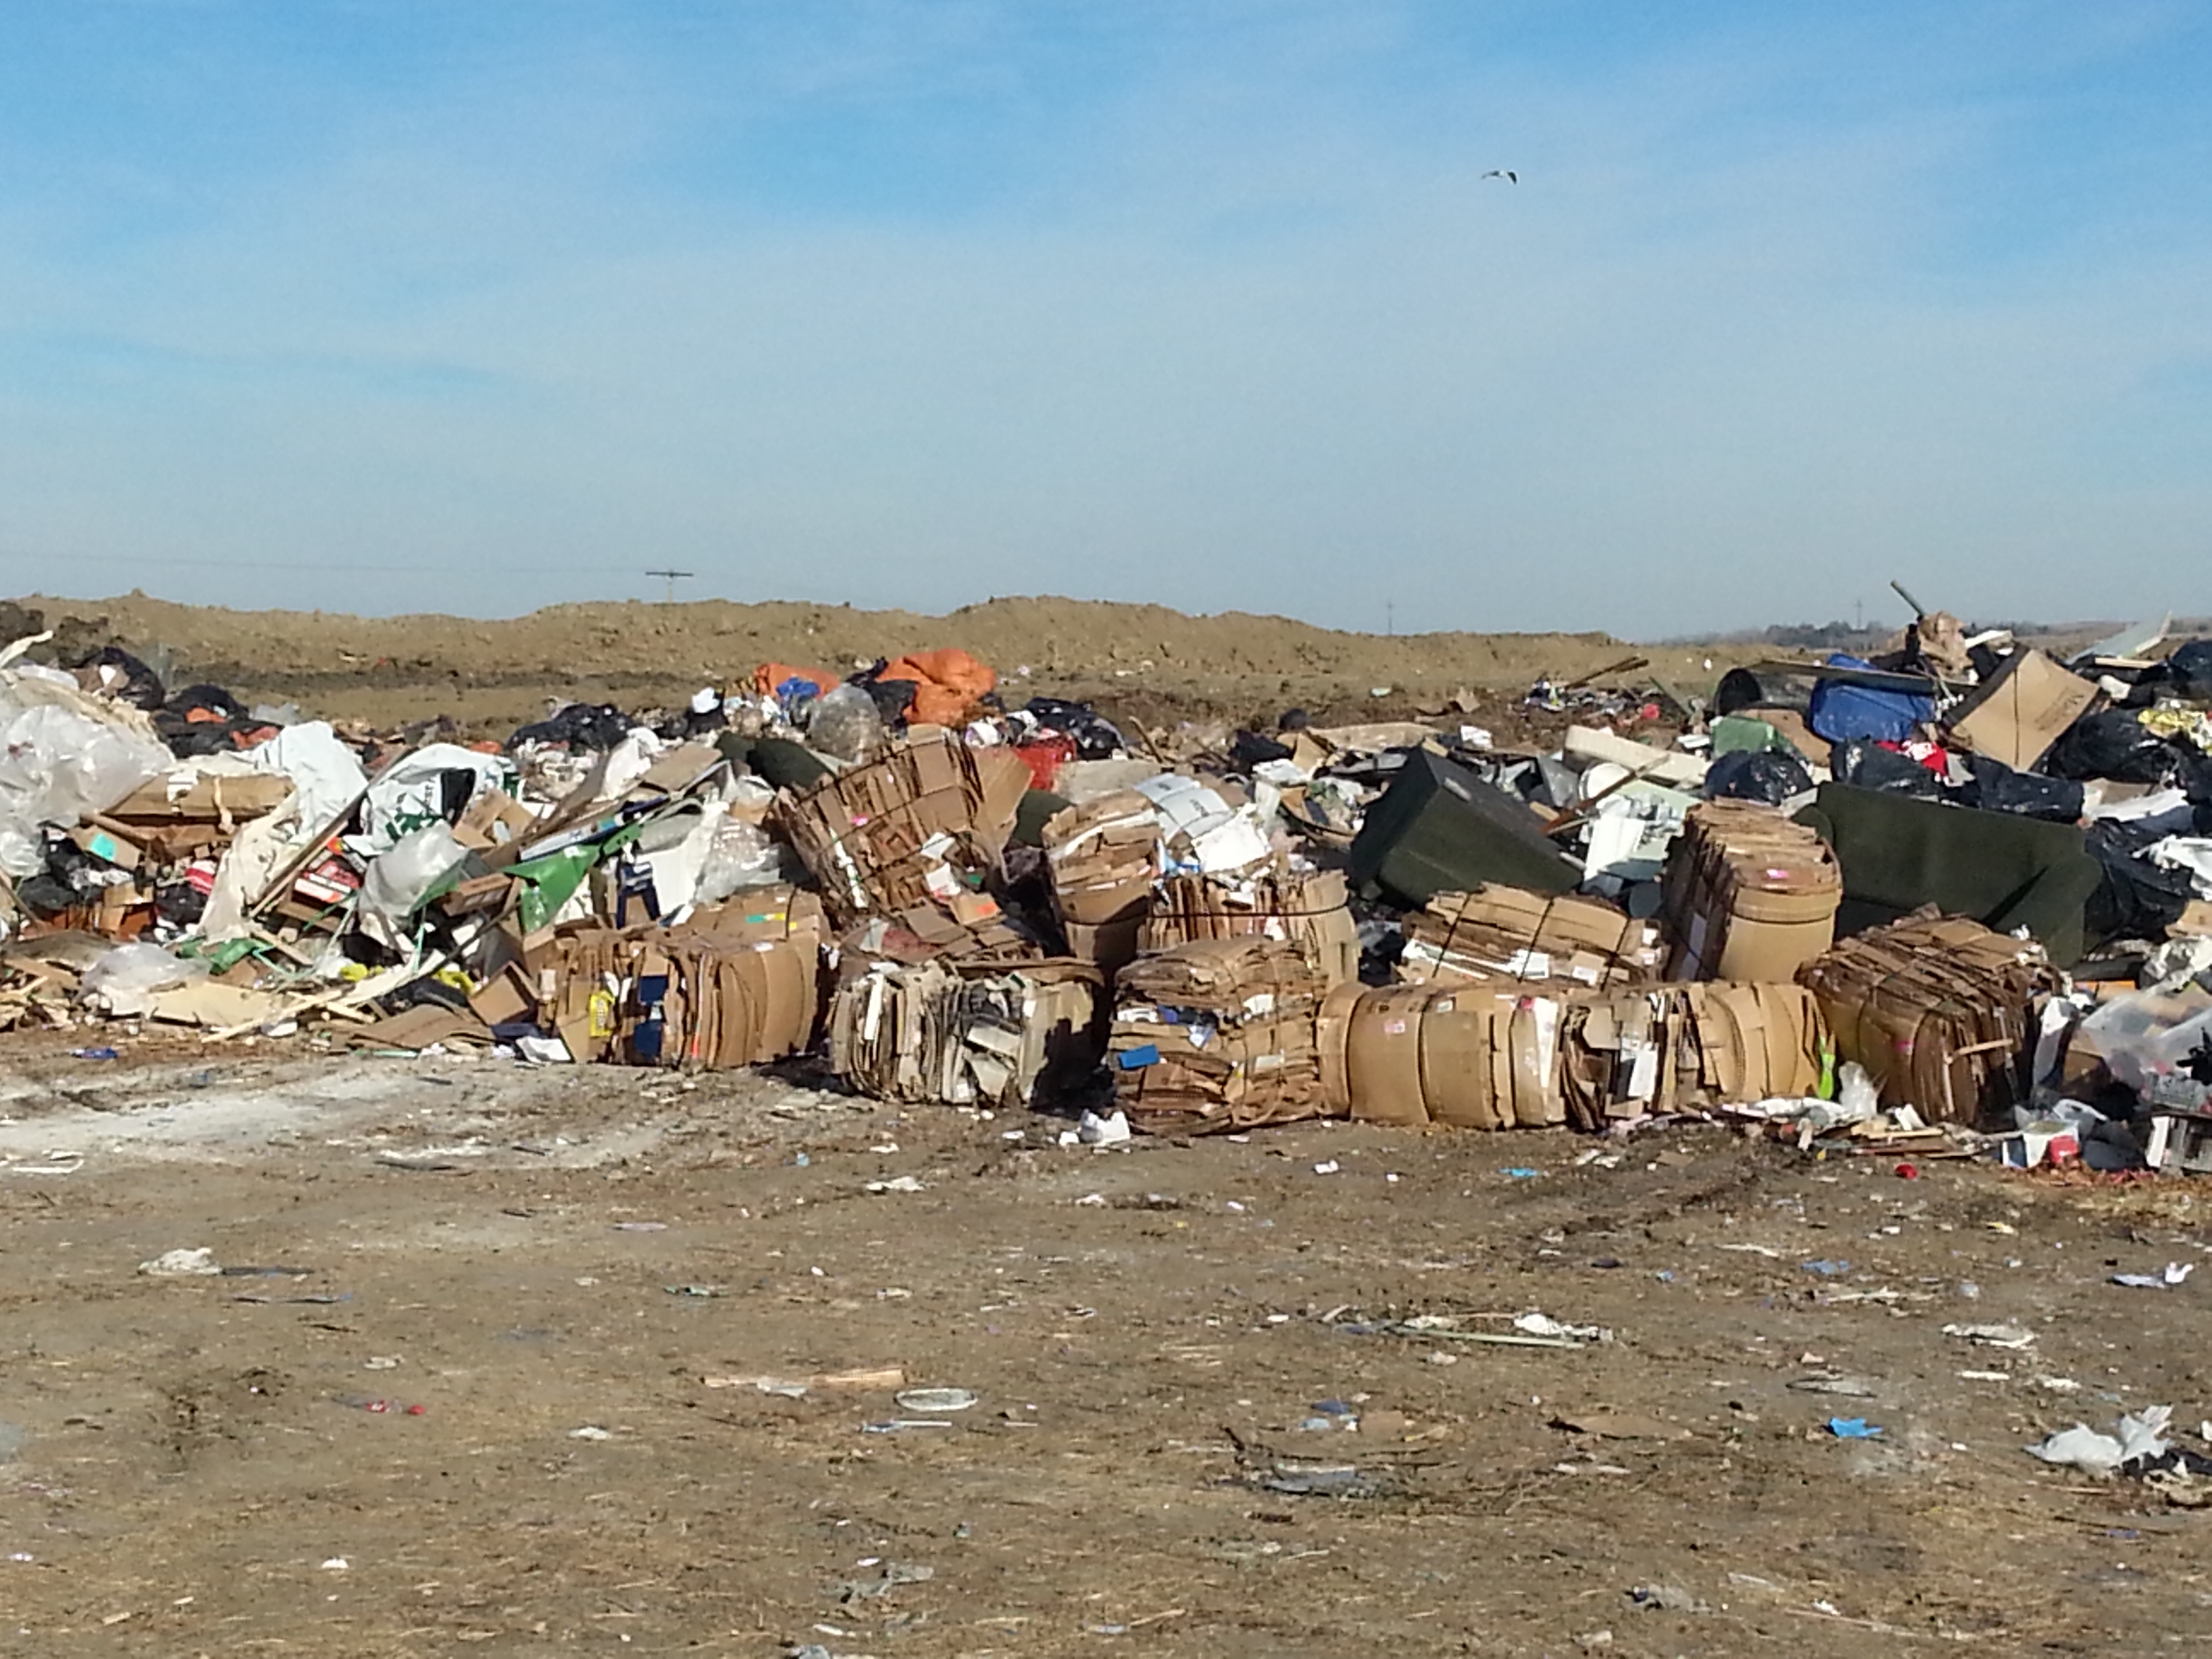 City of Swift Current landfill